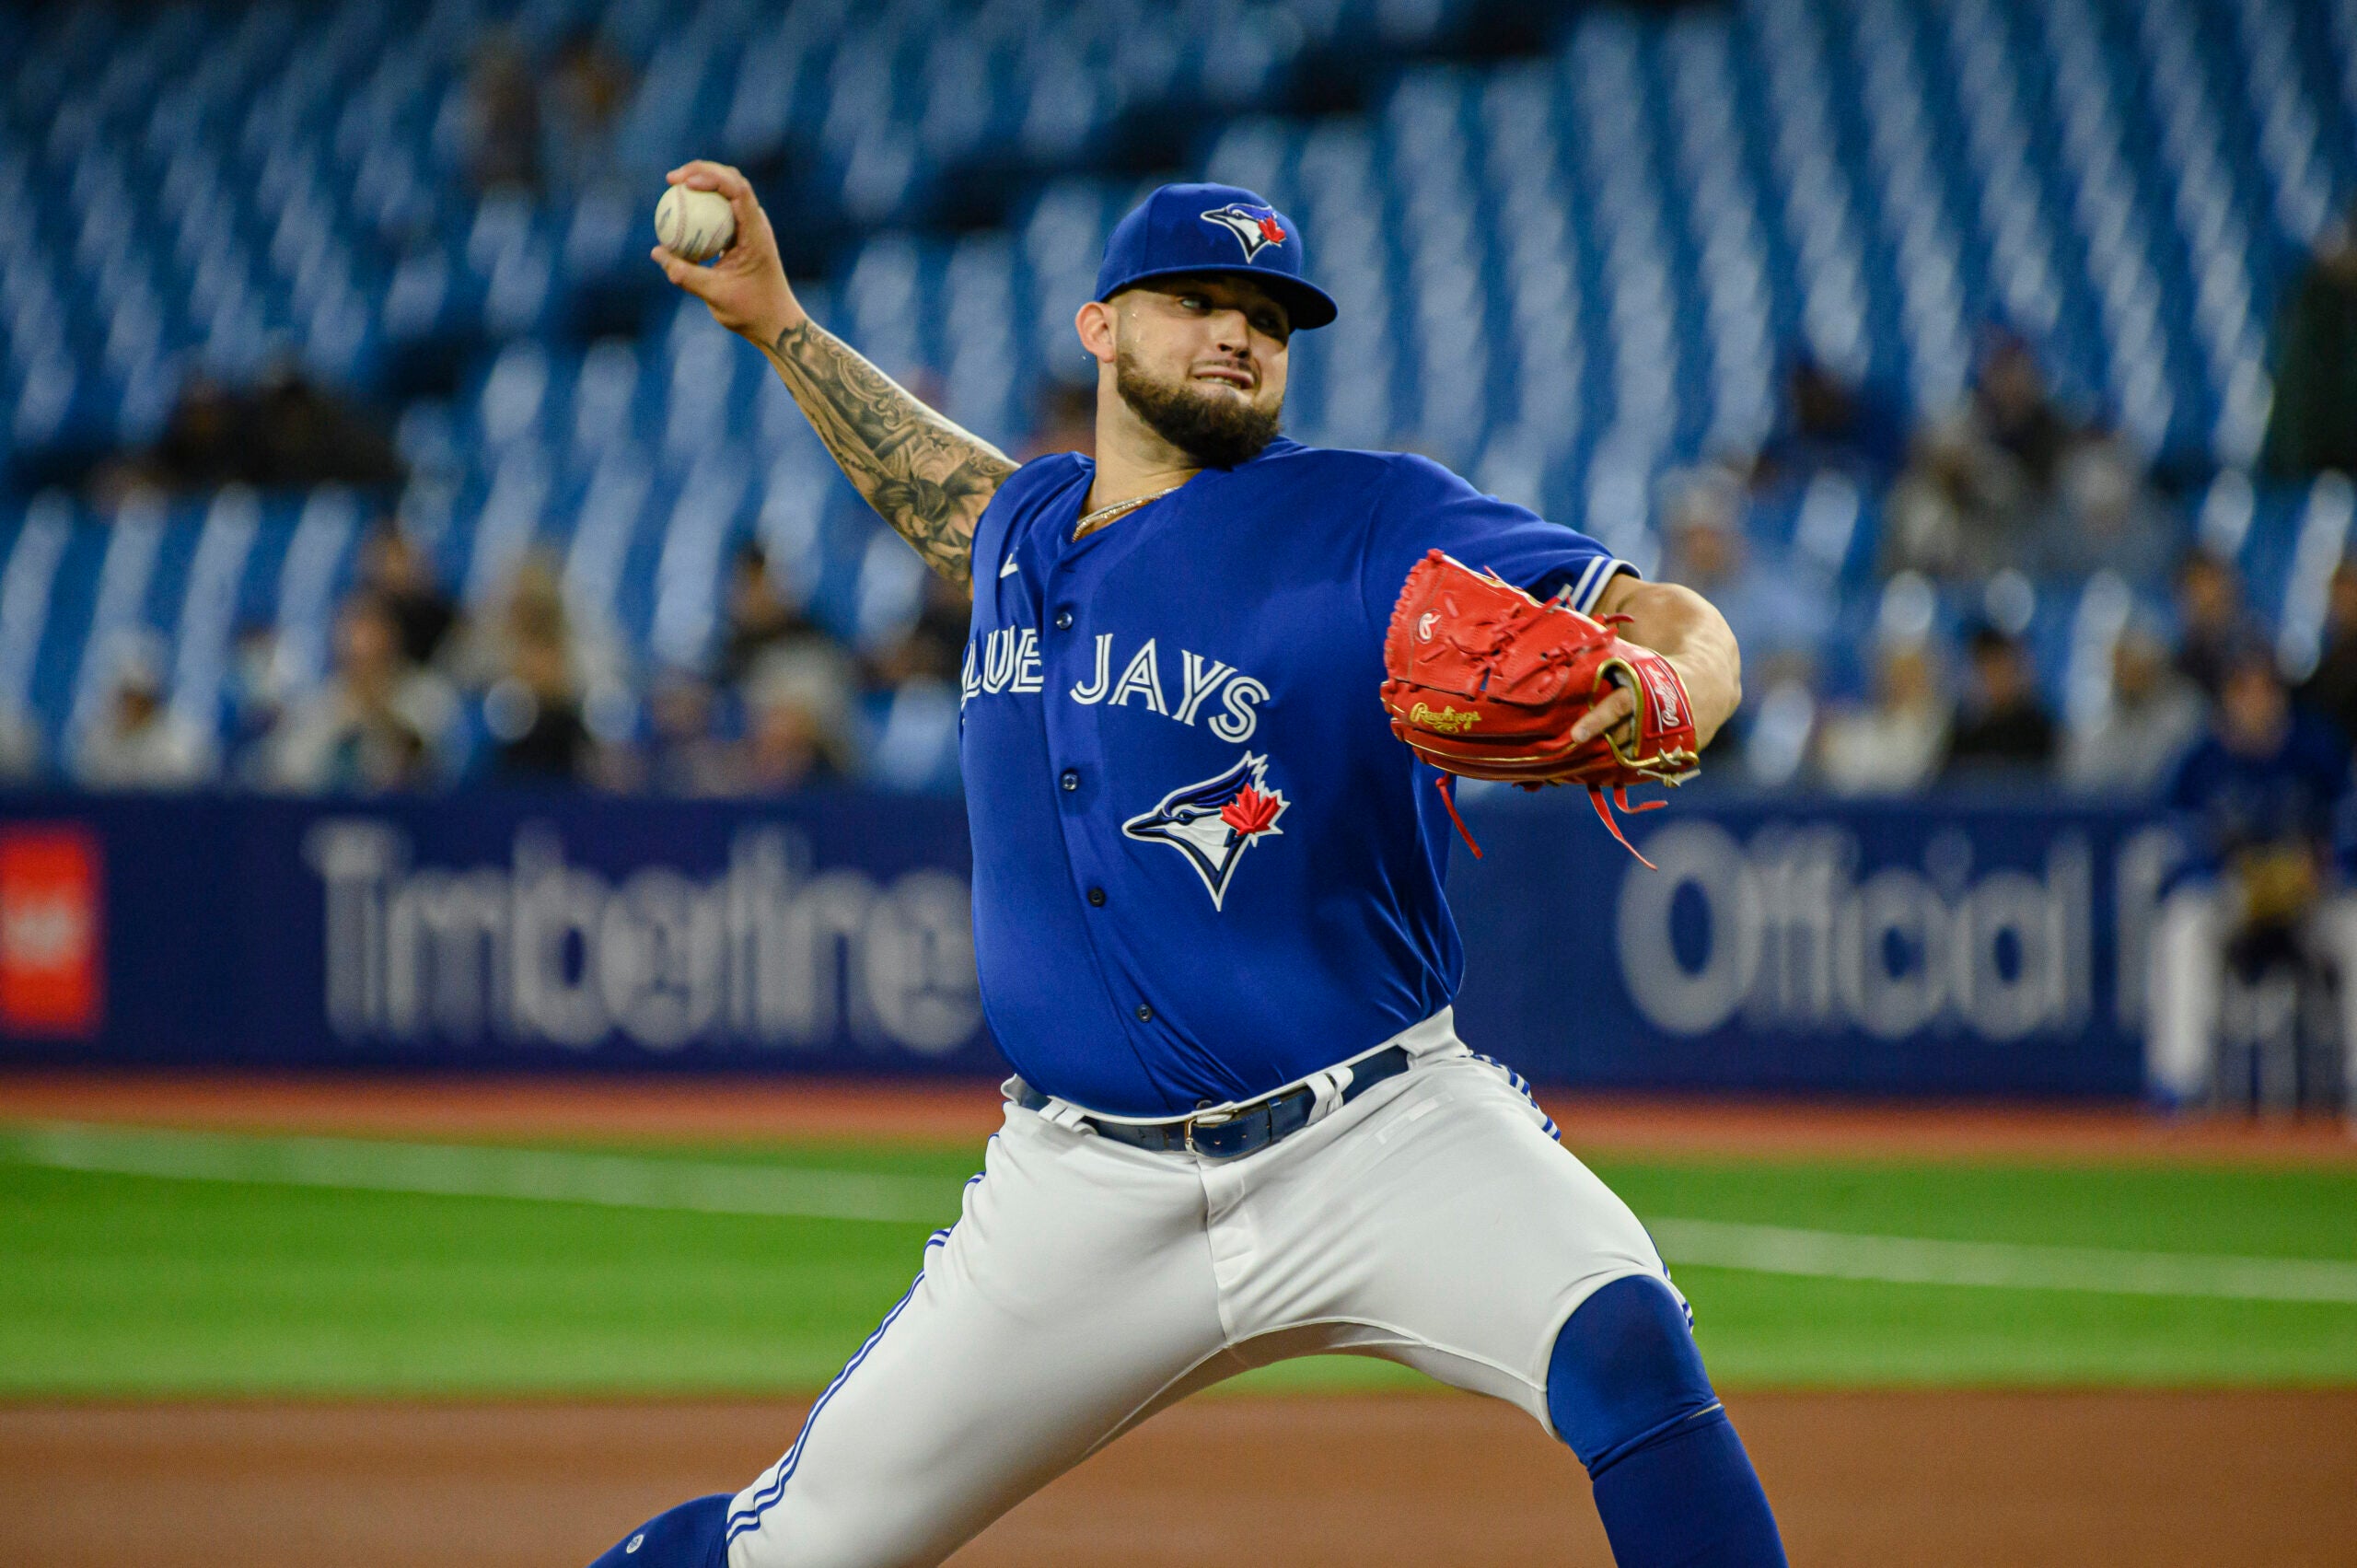 Red Sox bats go silent in Toronto, Blue Jays win 1-0